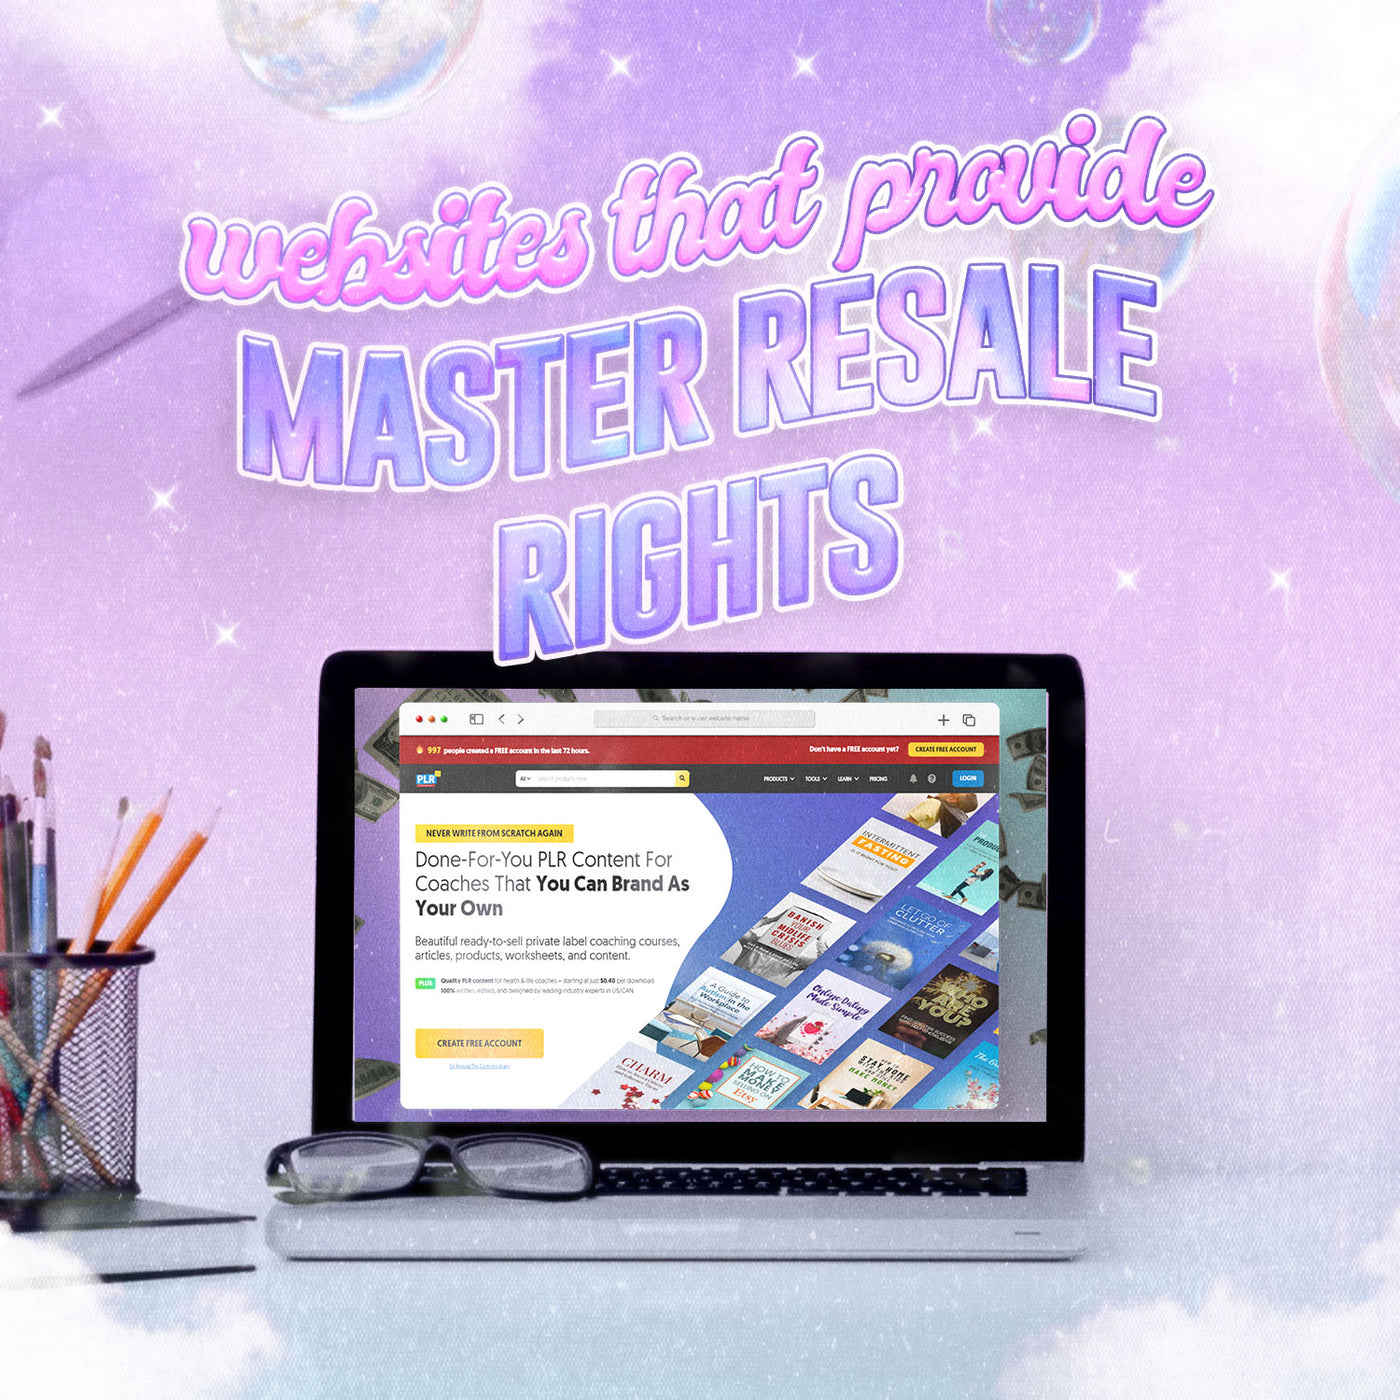 Digital Products - Master Resale Rights Websites